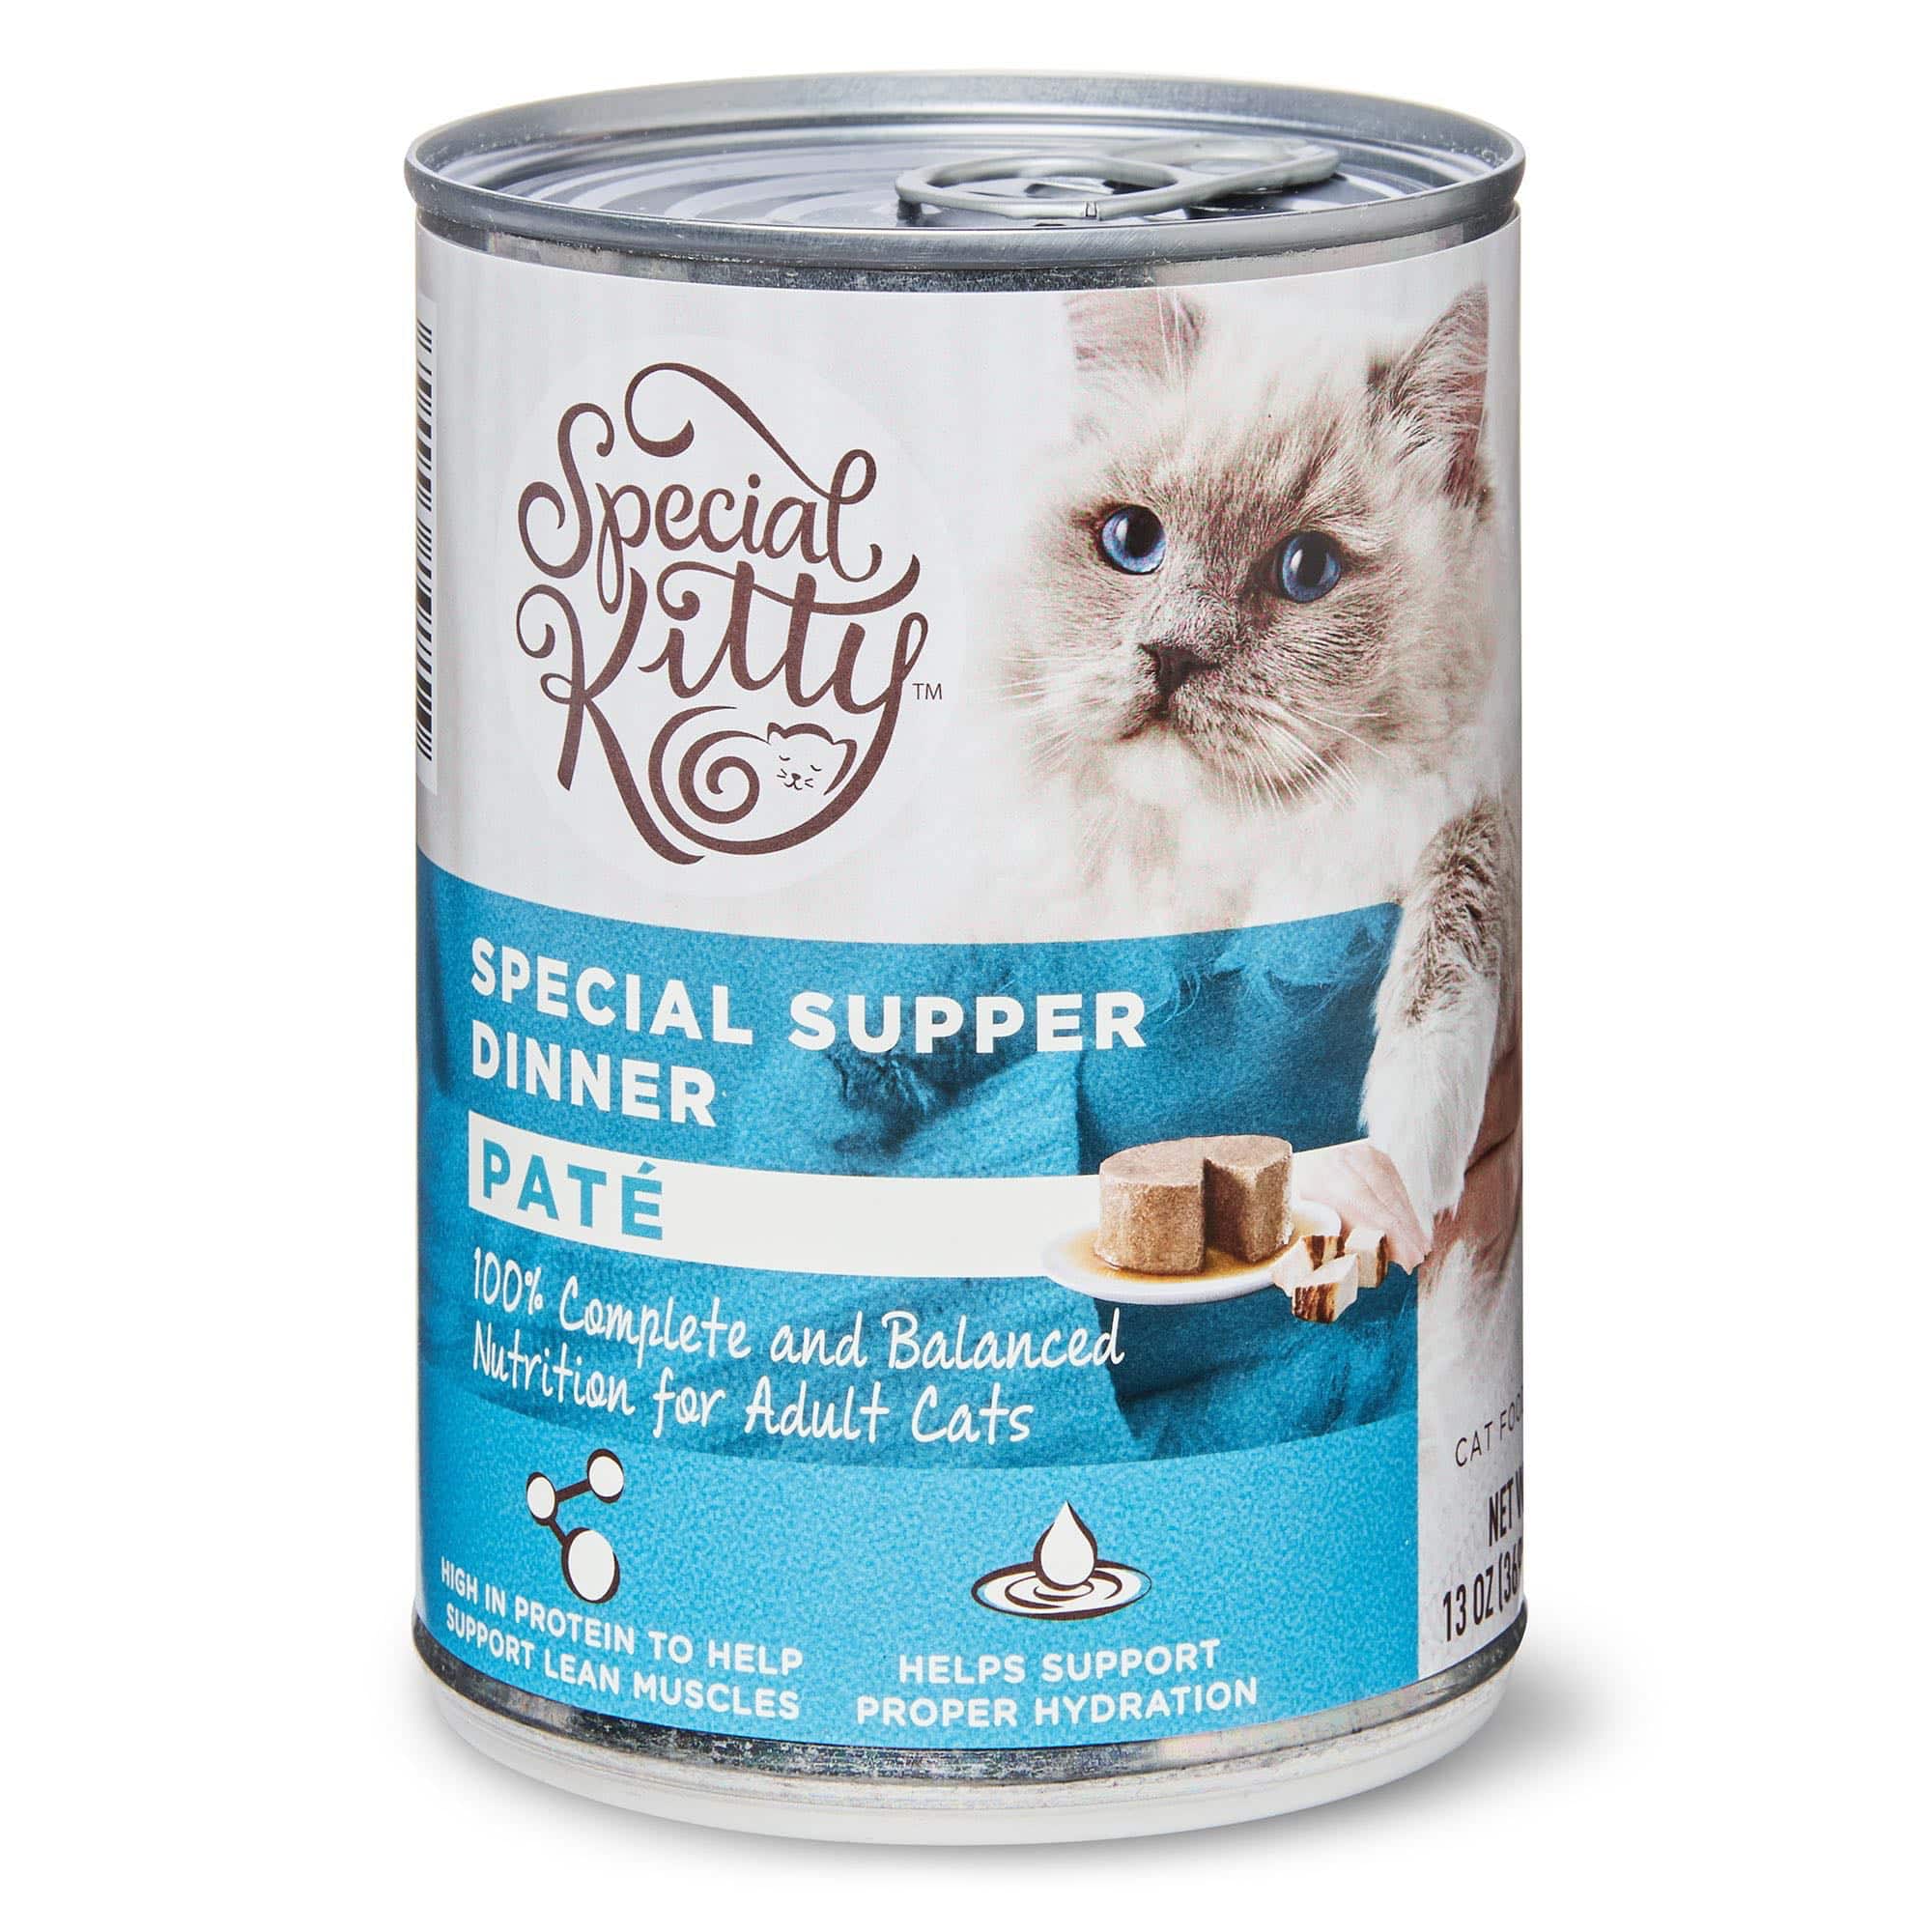 Special Kitty Special Supper Dinner Pate Wet Cat Food, 13 oz